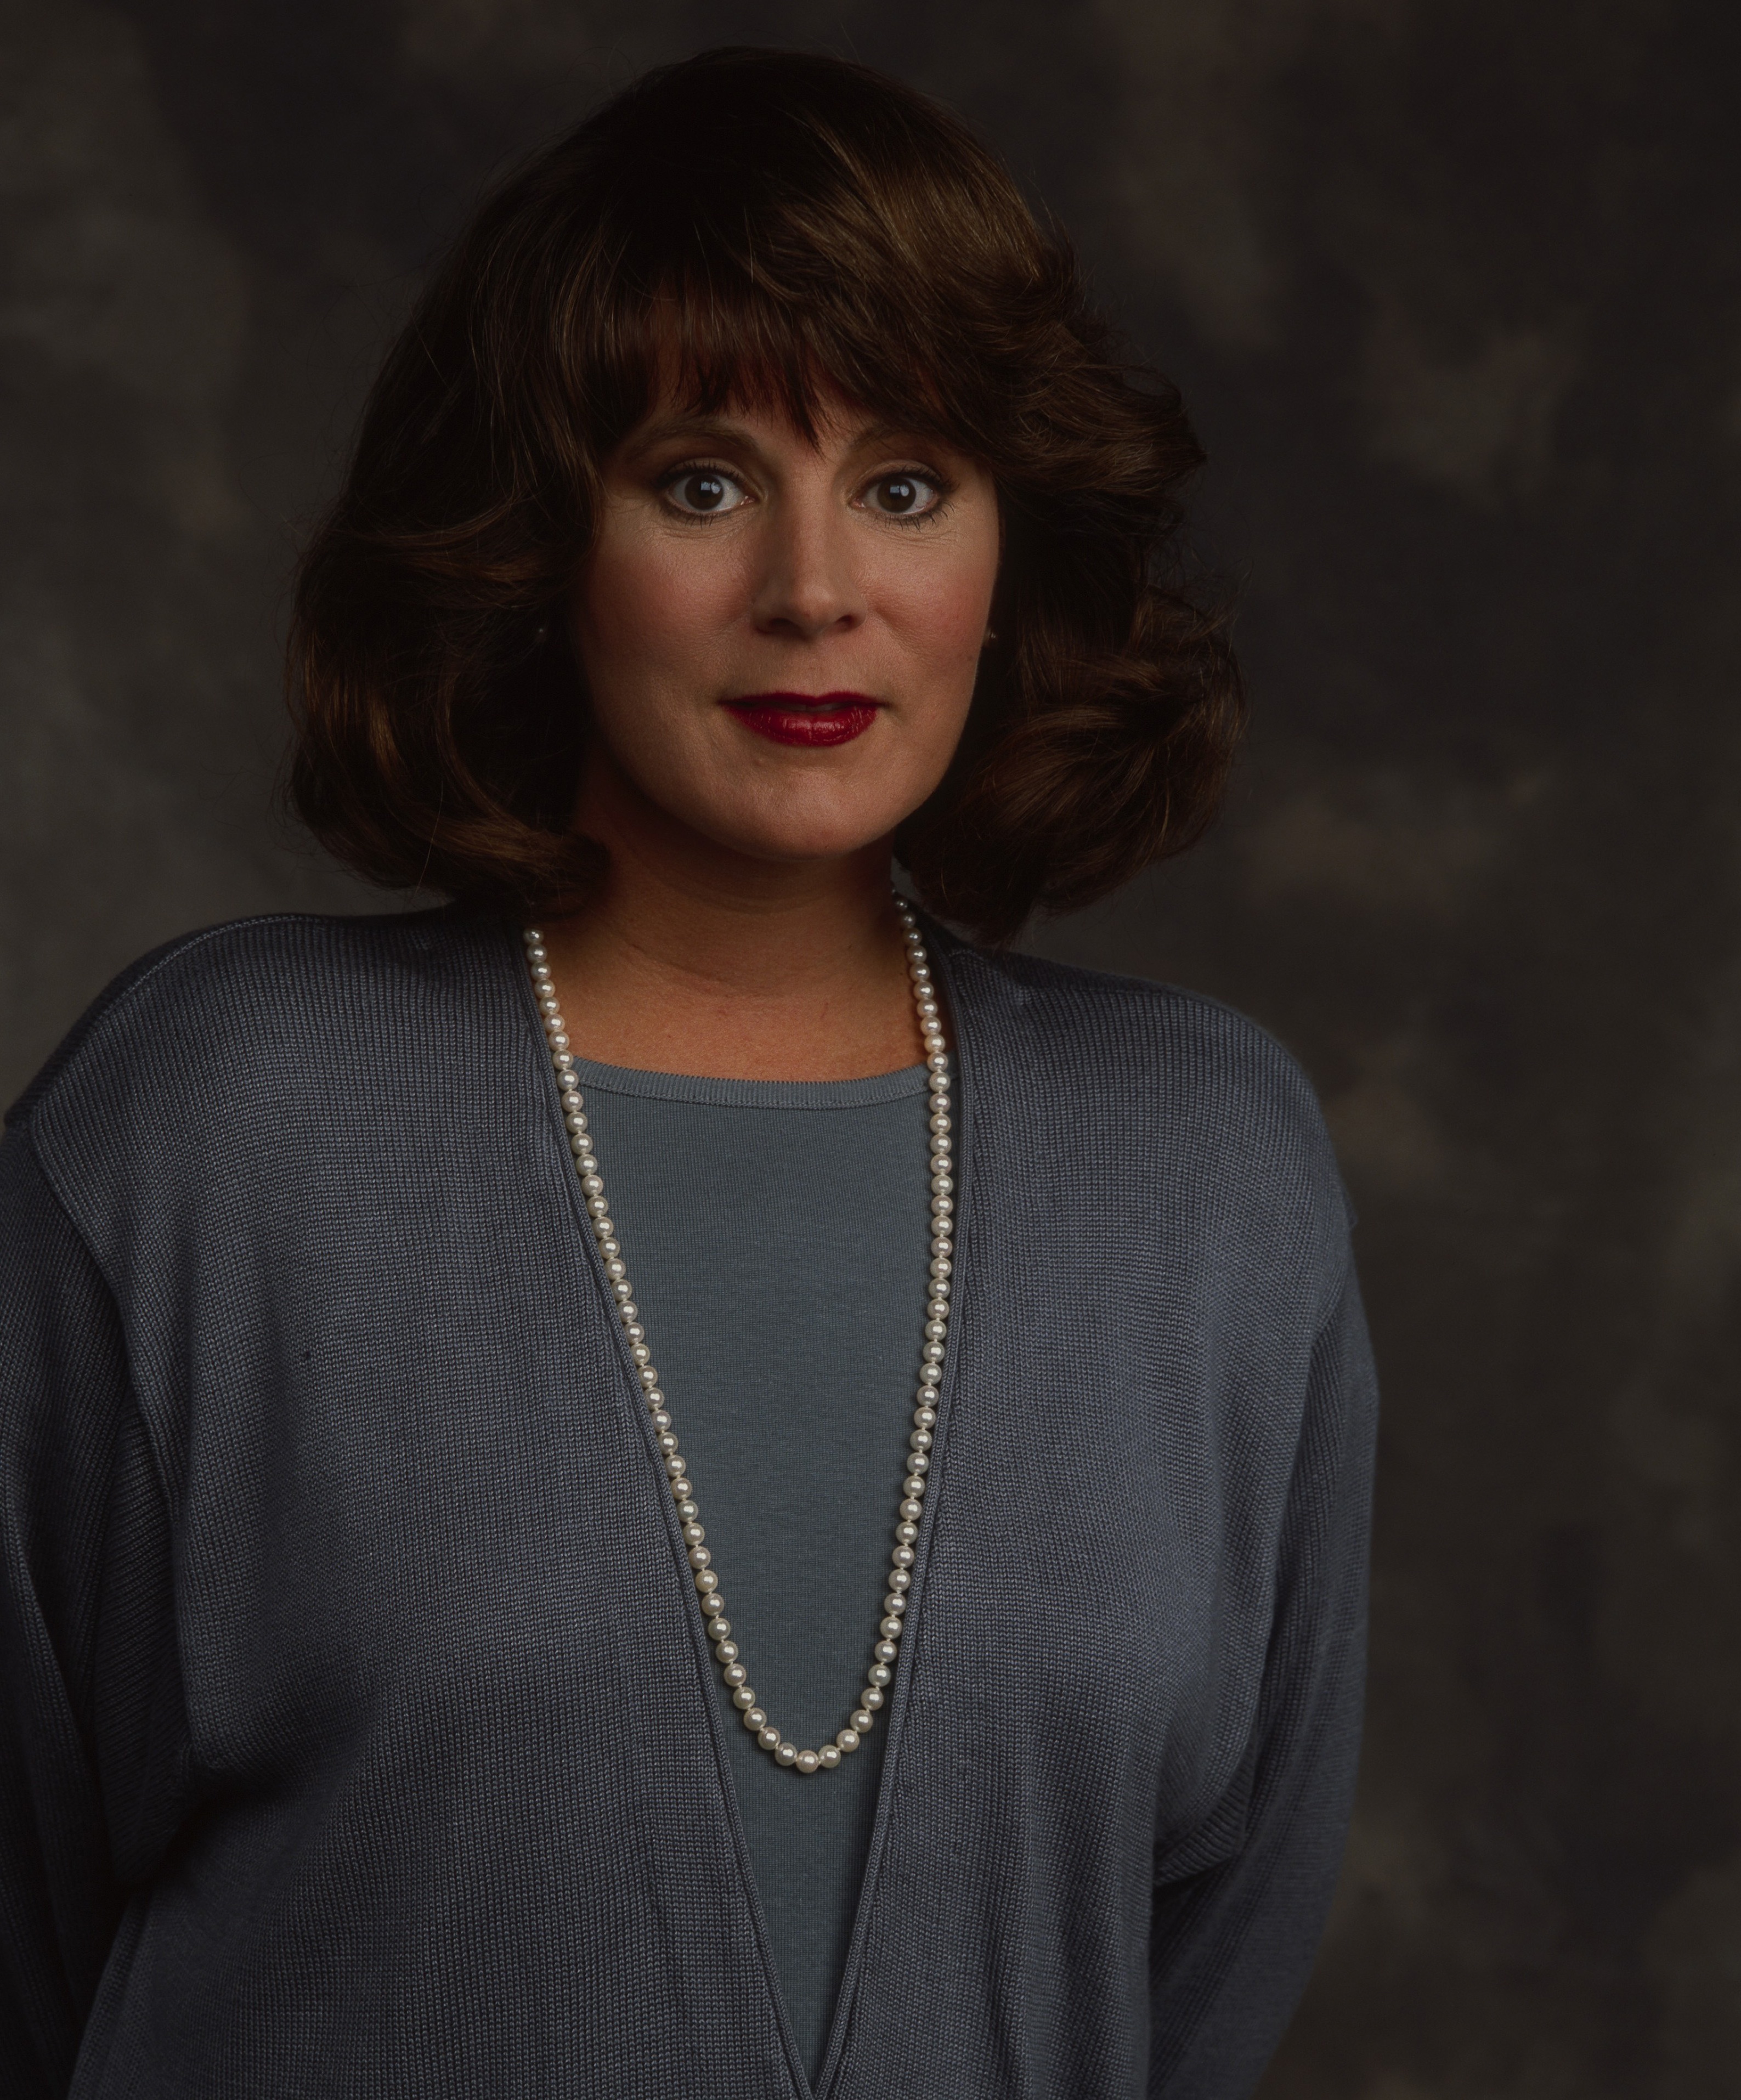 Patricia Richardson for "Home Improvement" circa 1991 | Source: Getty Images